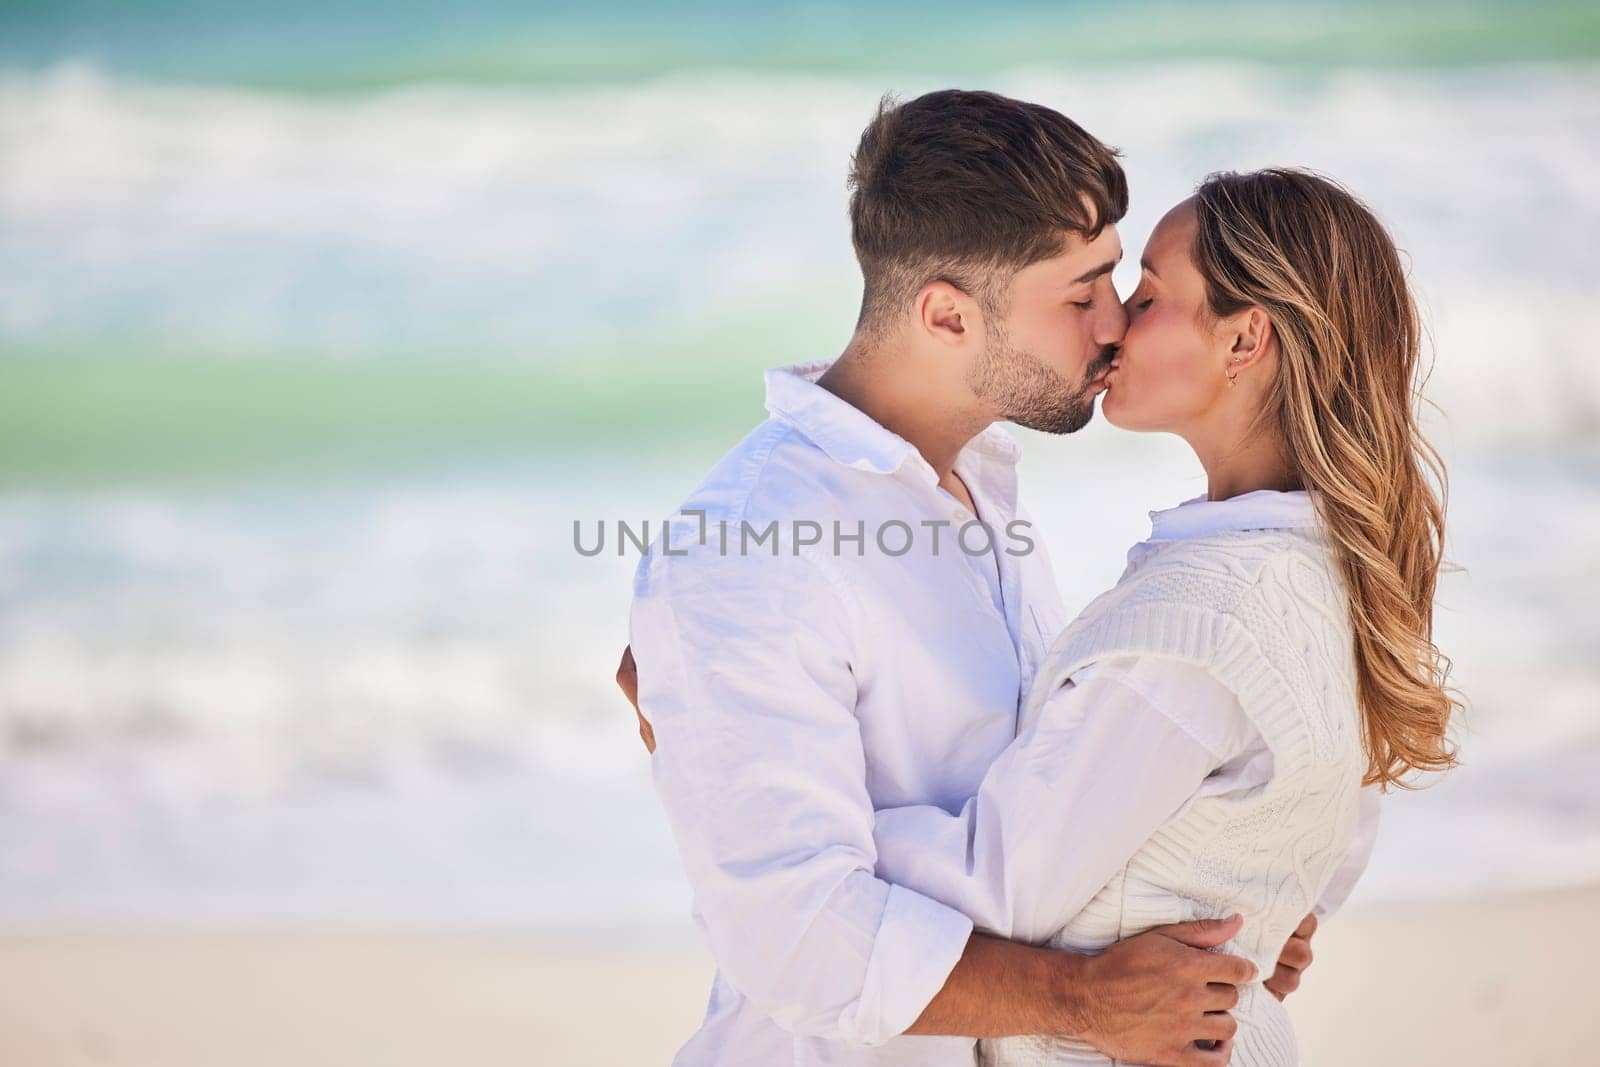 Mockup, beach or couple love to kiss on holiday vacation or romantic honeymoon to celebrate marriage commitment. Travel, trust or woman bonding, kissing or hugging partner in summer romance at sea.